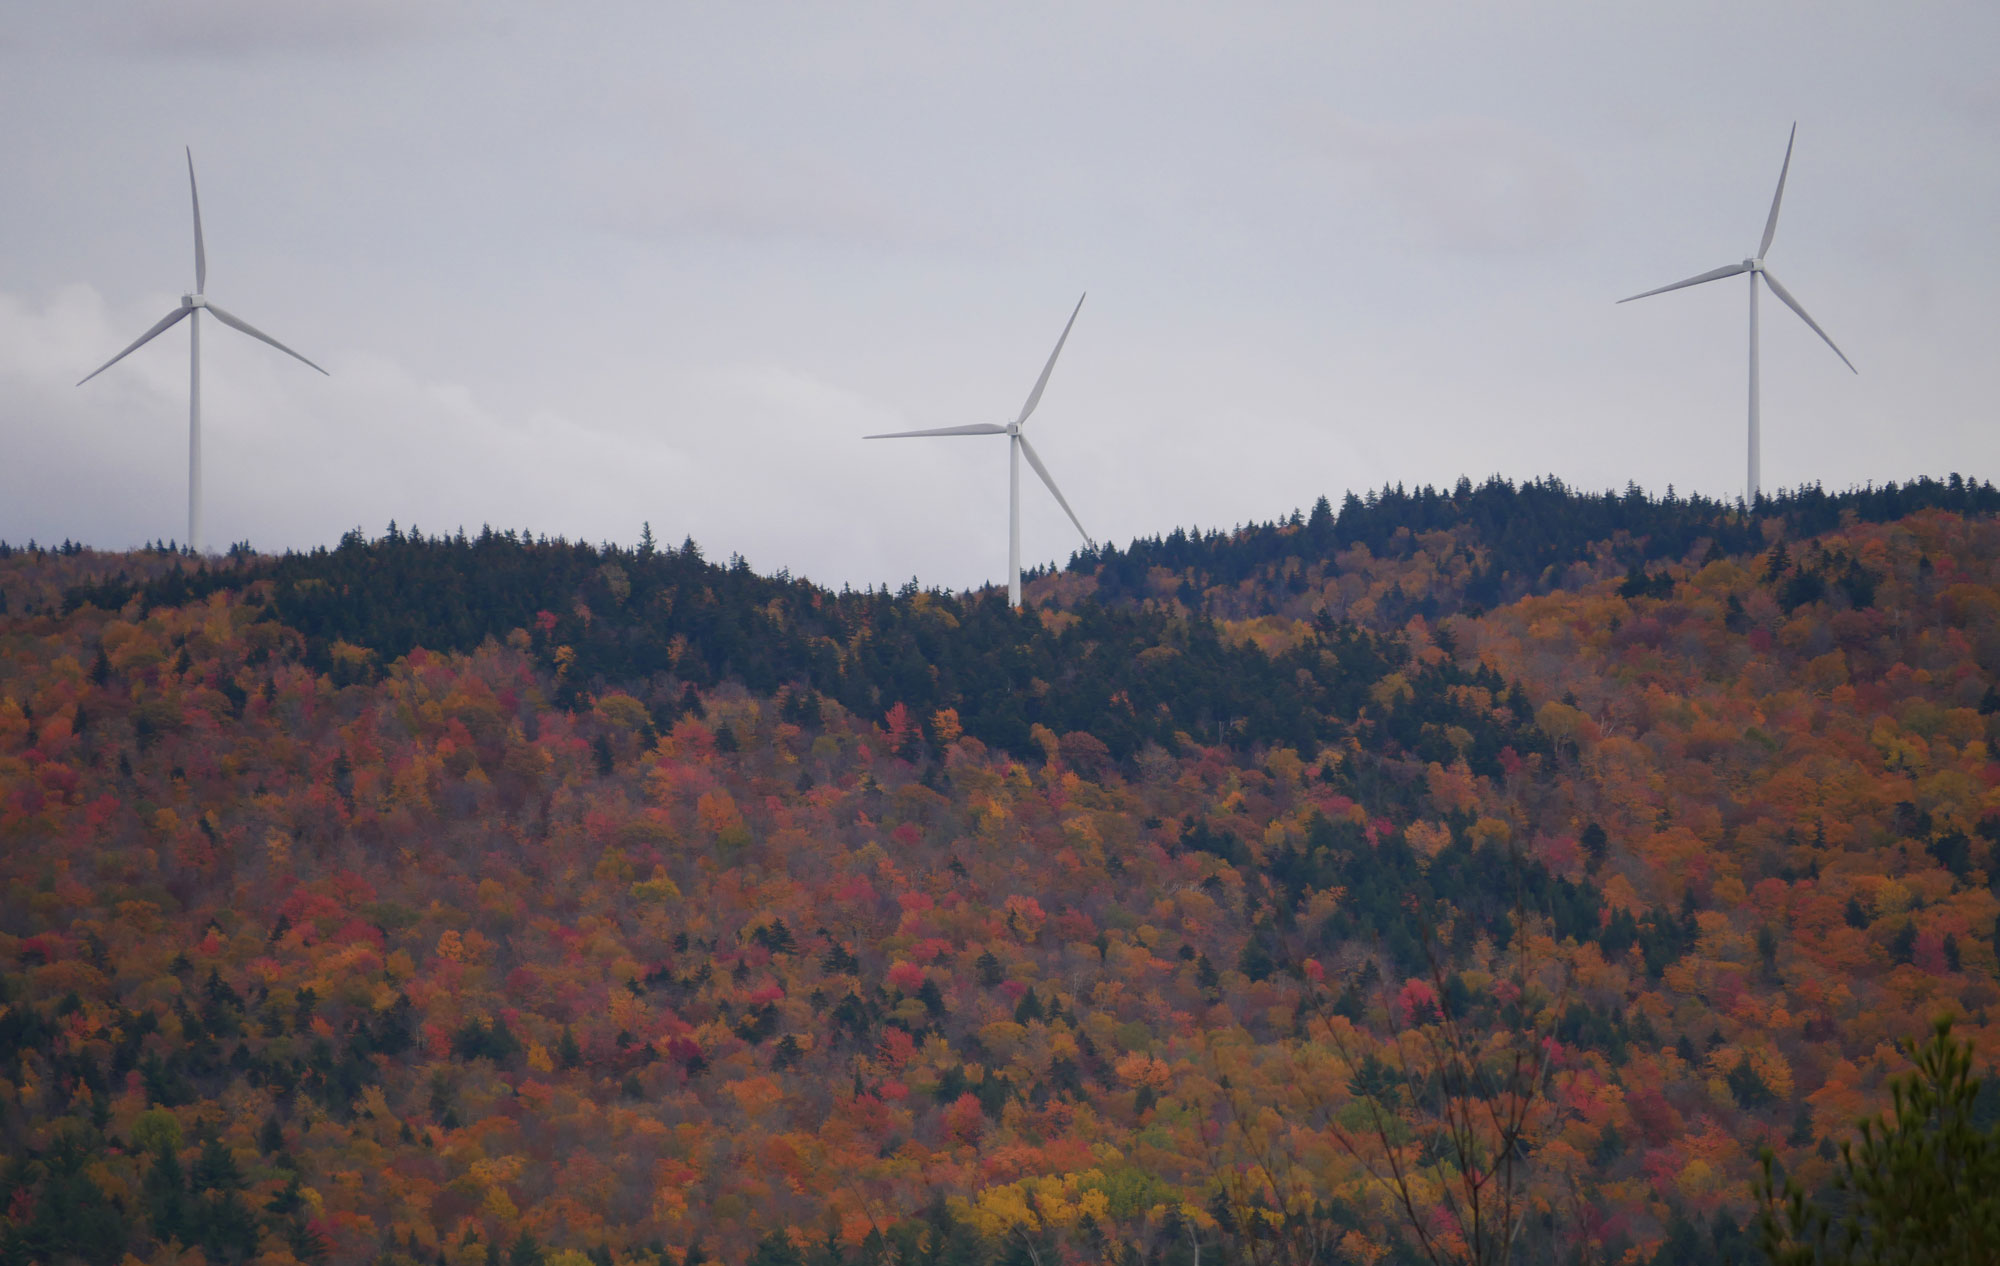 Photograph of Spruce Mountain Wind Farm in Maine. The photo shows three large, white wind turbines near the top of a forest ridge. The ridge is a mix of evergreen and deciduous trees. The deciduous trees are in fall color.